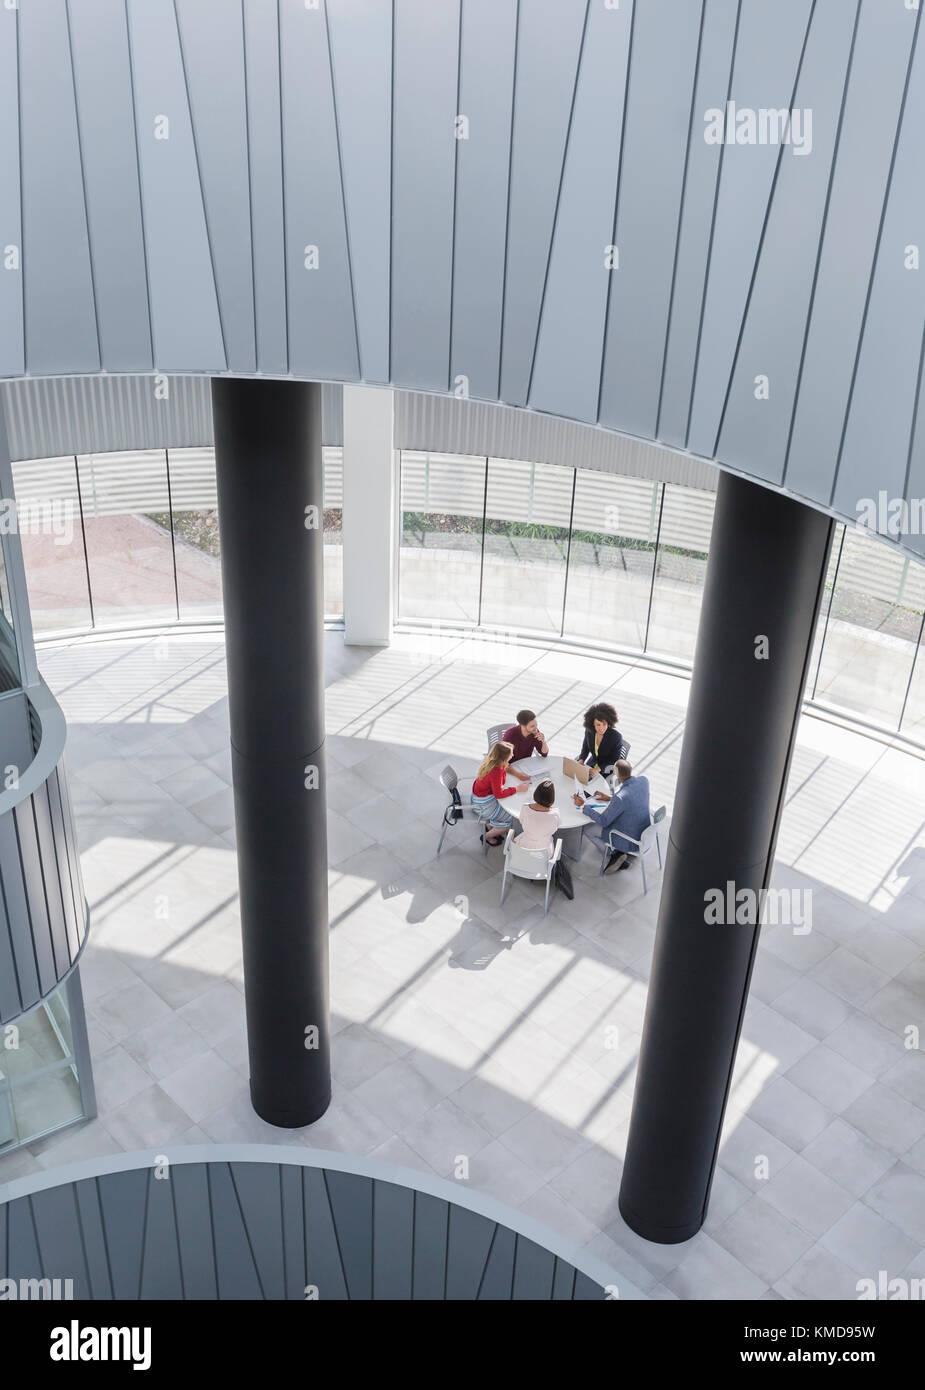 Business people meeting at table in modern office atrium Stock Photo